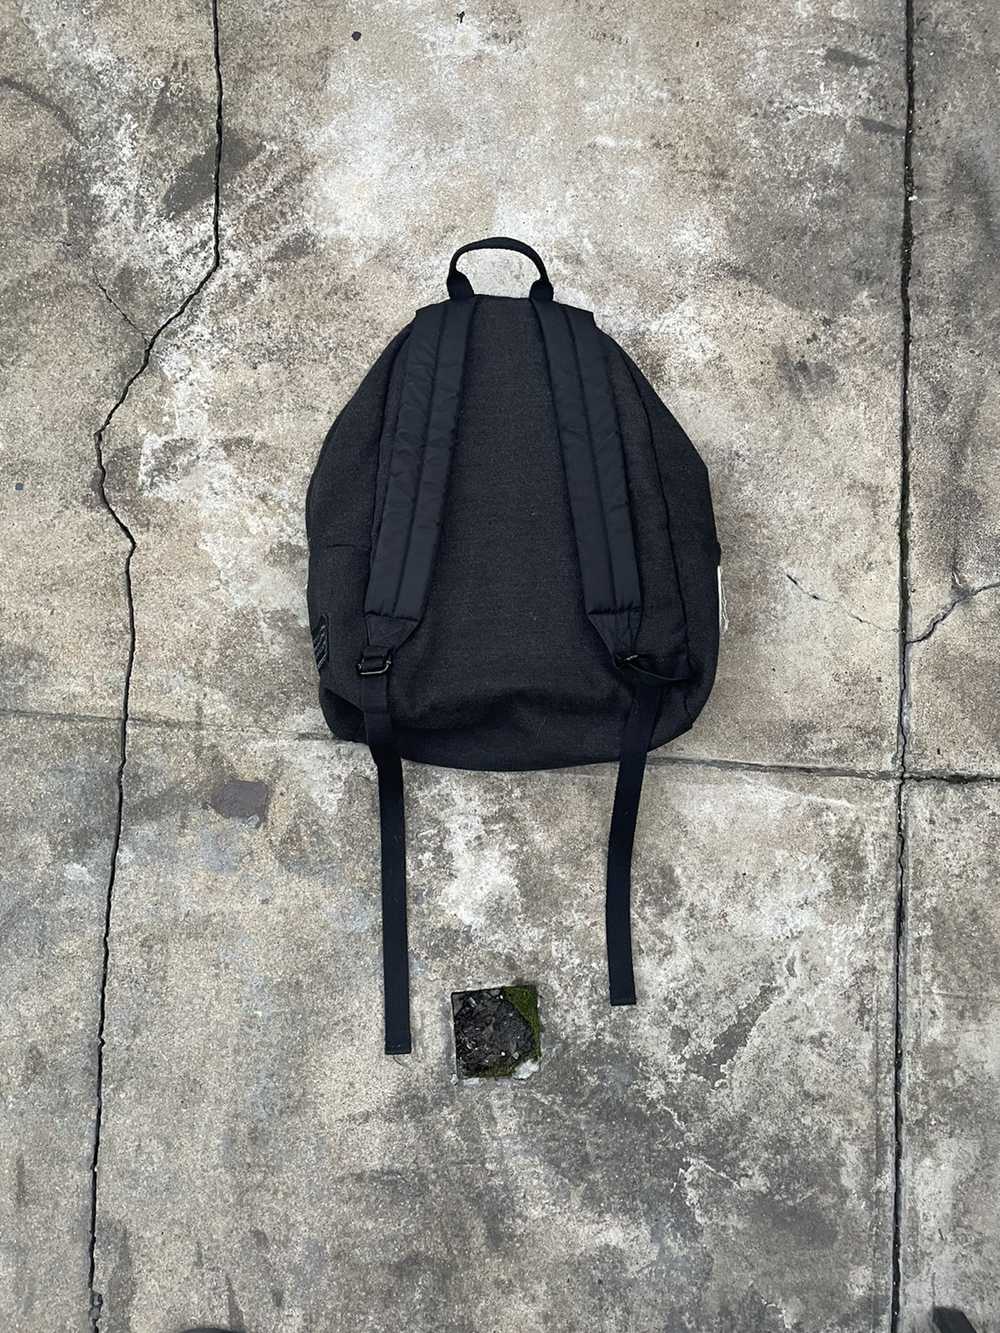 internetfame: trailsoflight: Raf Simons X Eastpak backpack This is the only  great thing to come out from the Eastpak des…